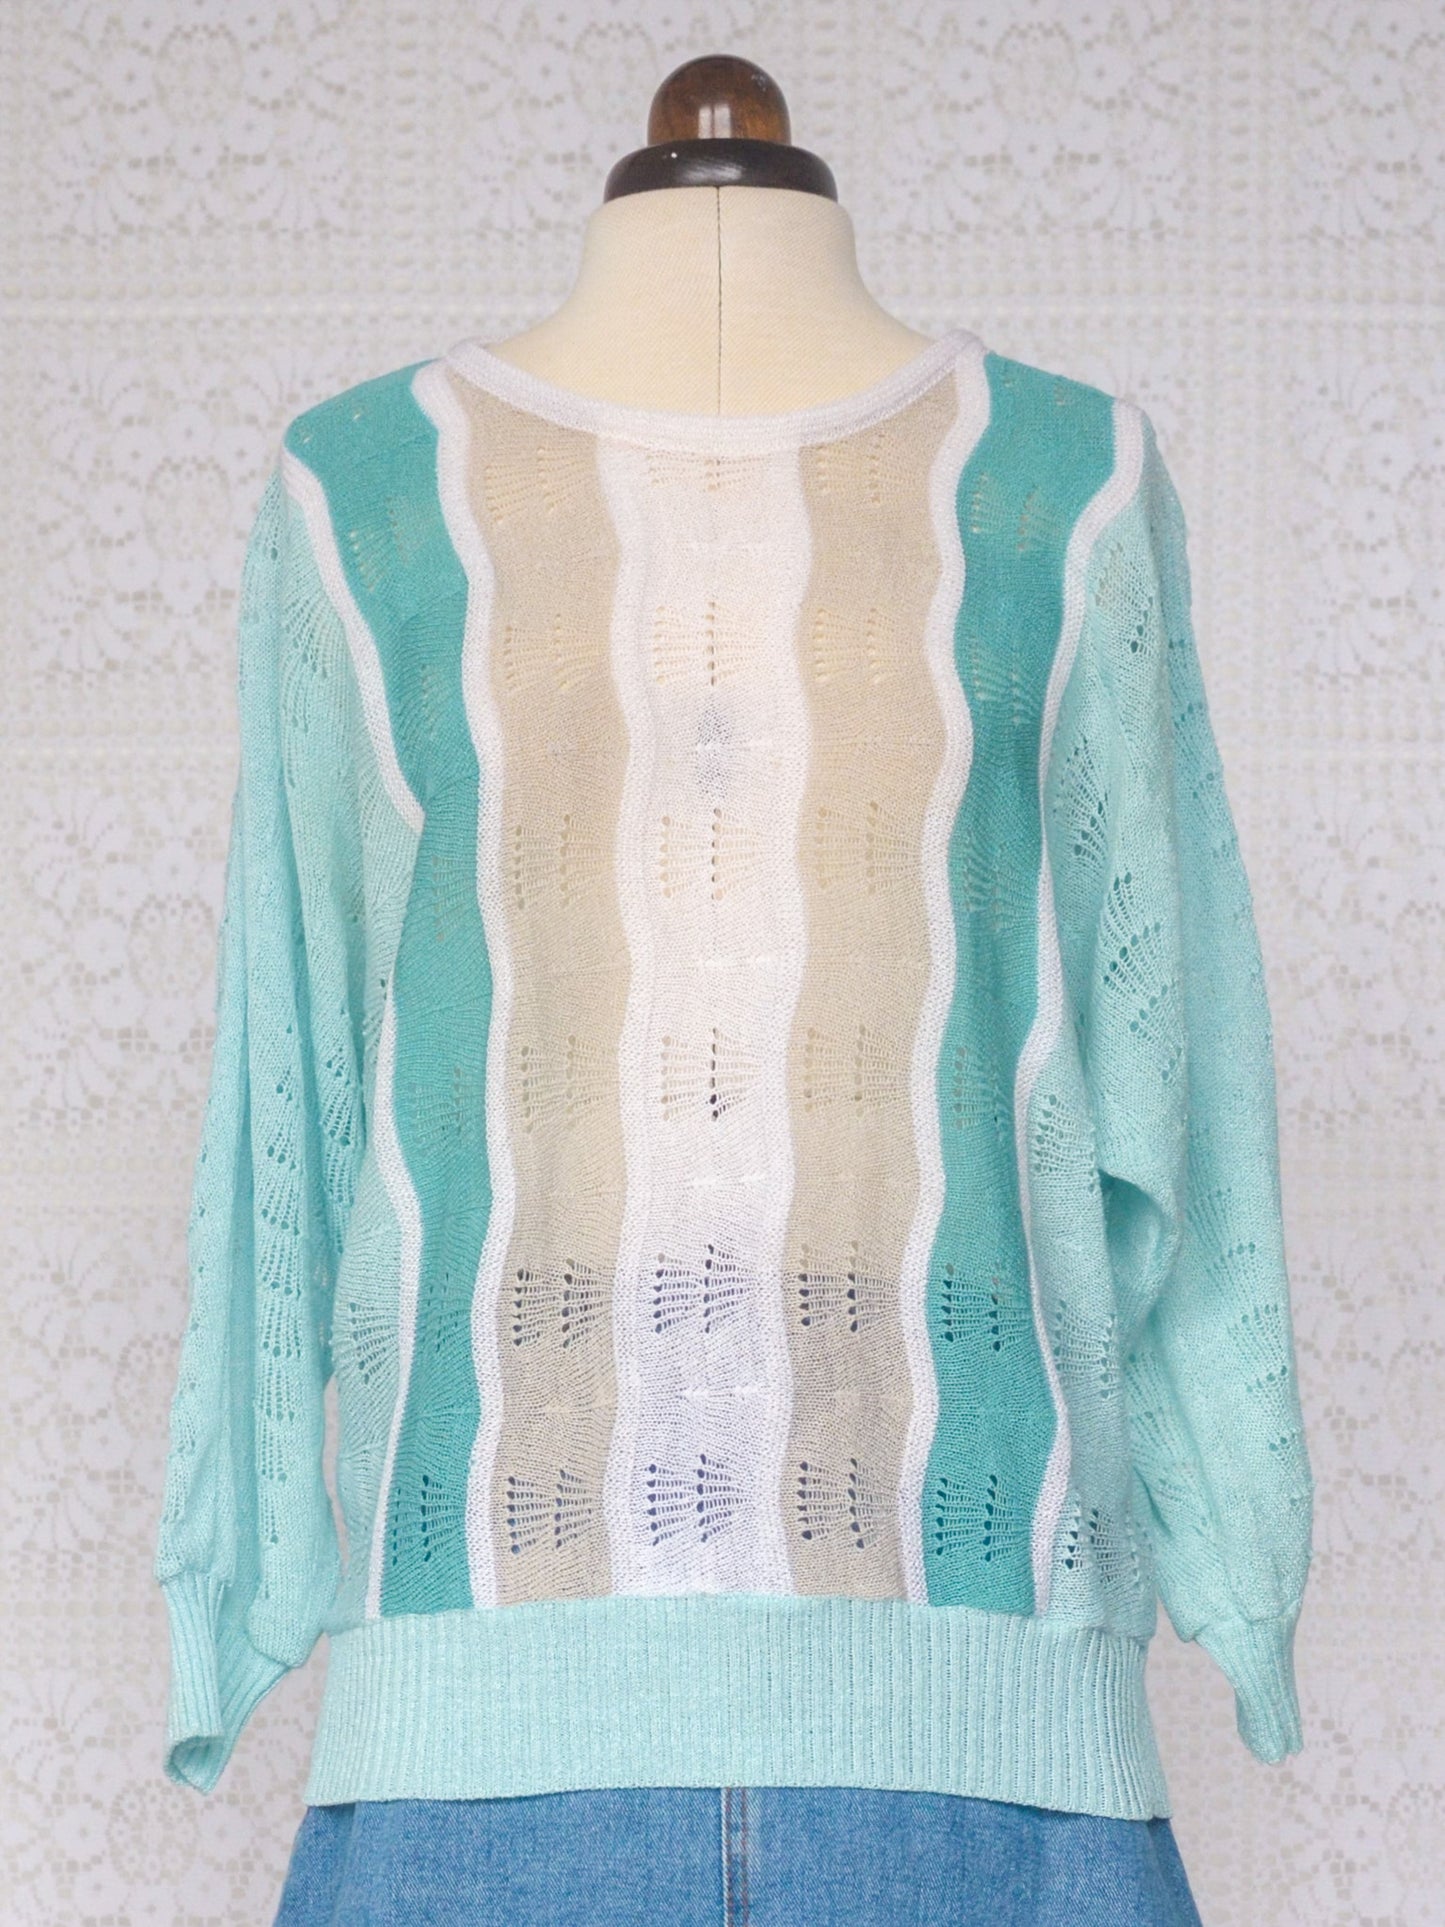 1980s turquoise lace knit batwing jumper